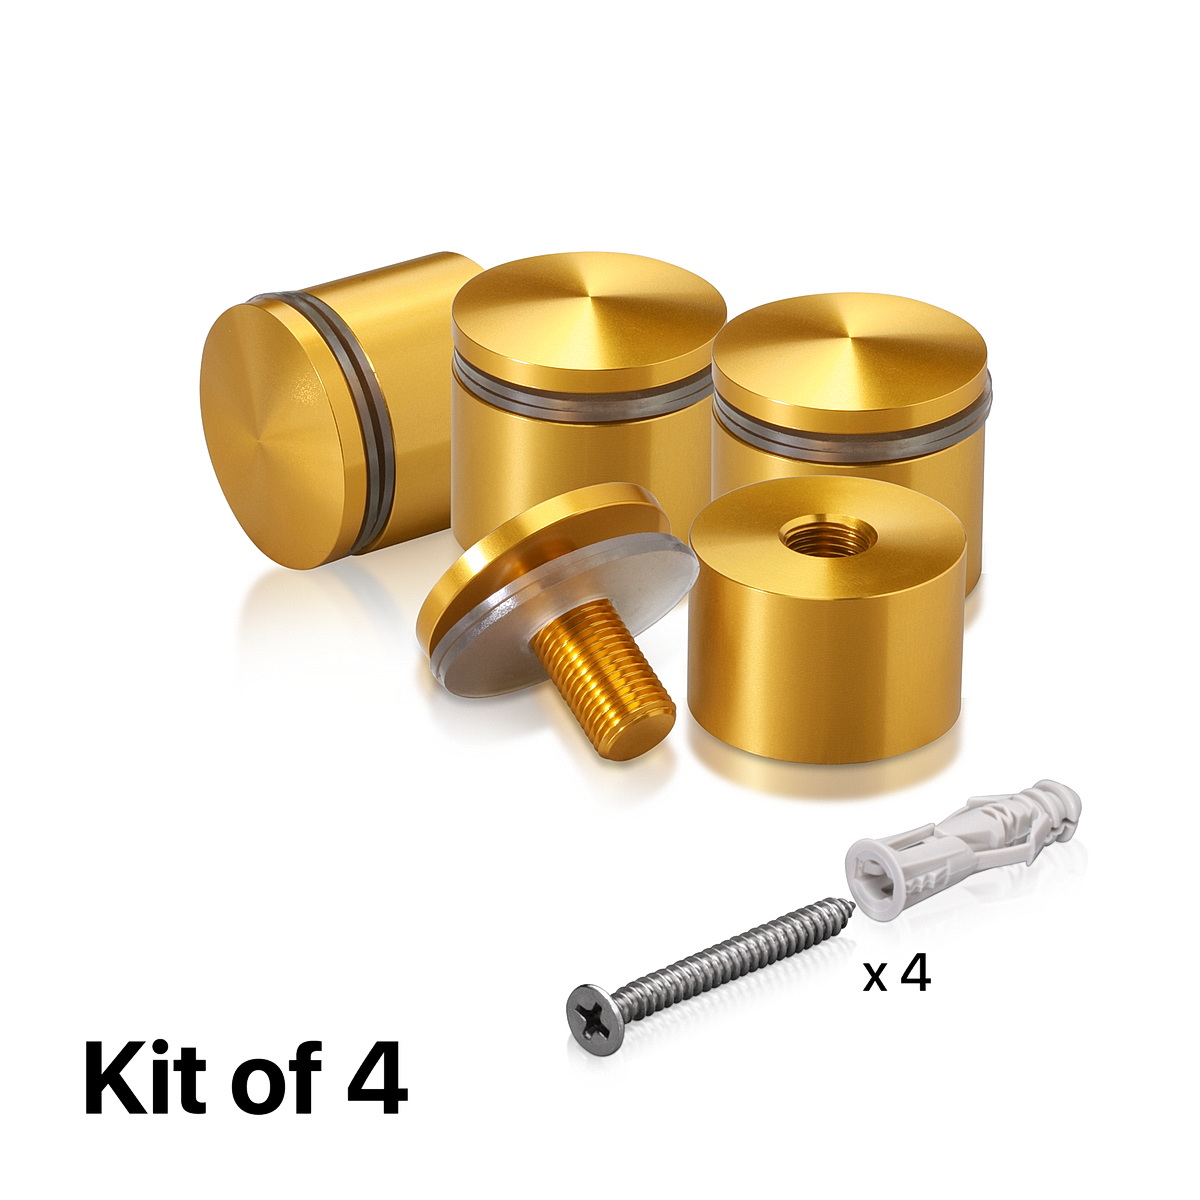 (Set of 4) 1-1/4'' Diameter X 3/4'' Barrel Length, Aluminum Rounded Head Standoffs, Gold Anodized Finish Standoff with (4) 2216Z Screws and (4) LANC1 Anchors for concrete or drywall (For Inside / Outside use) [Required Material Hole Size: 7/16'']